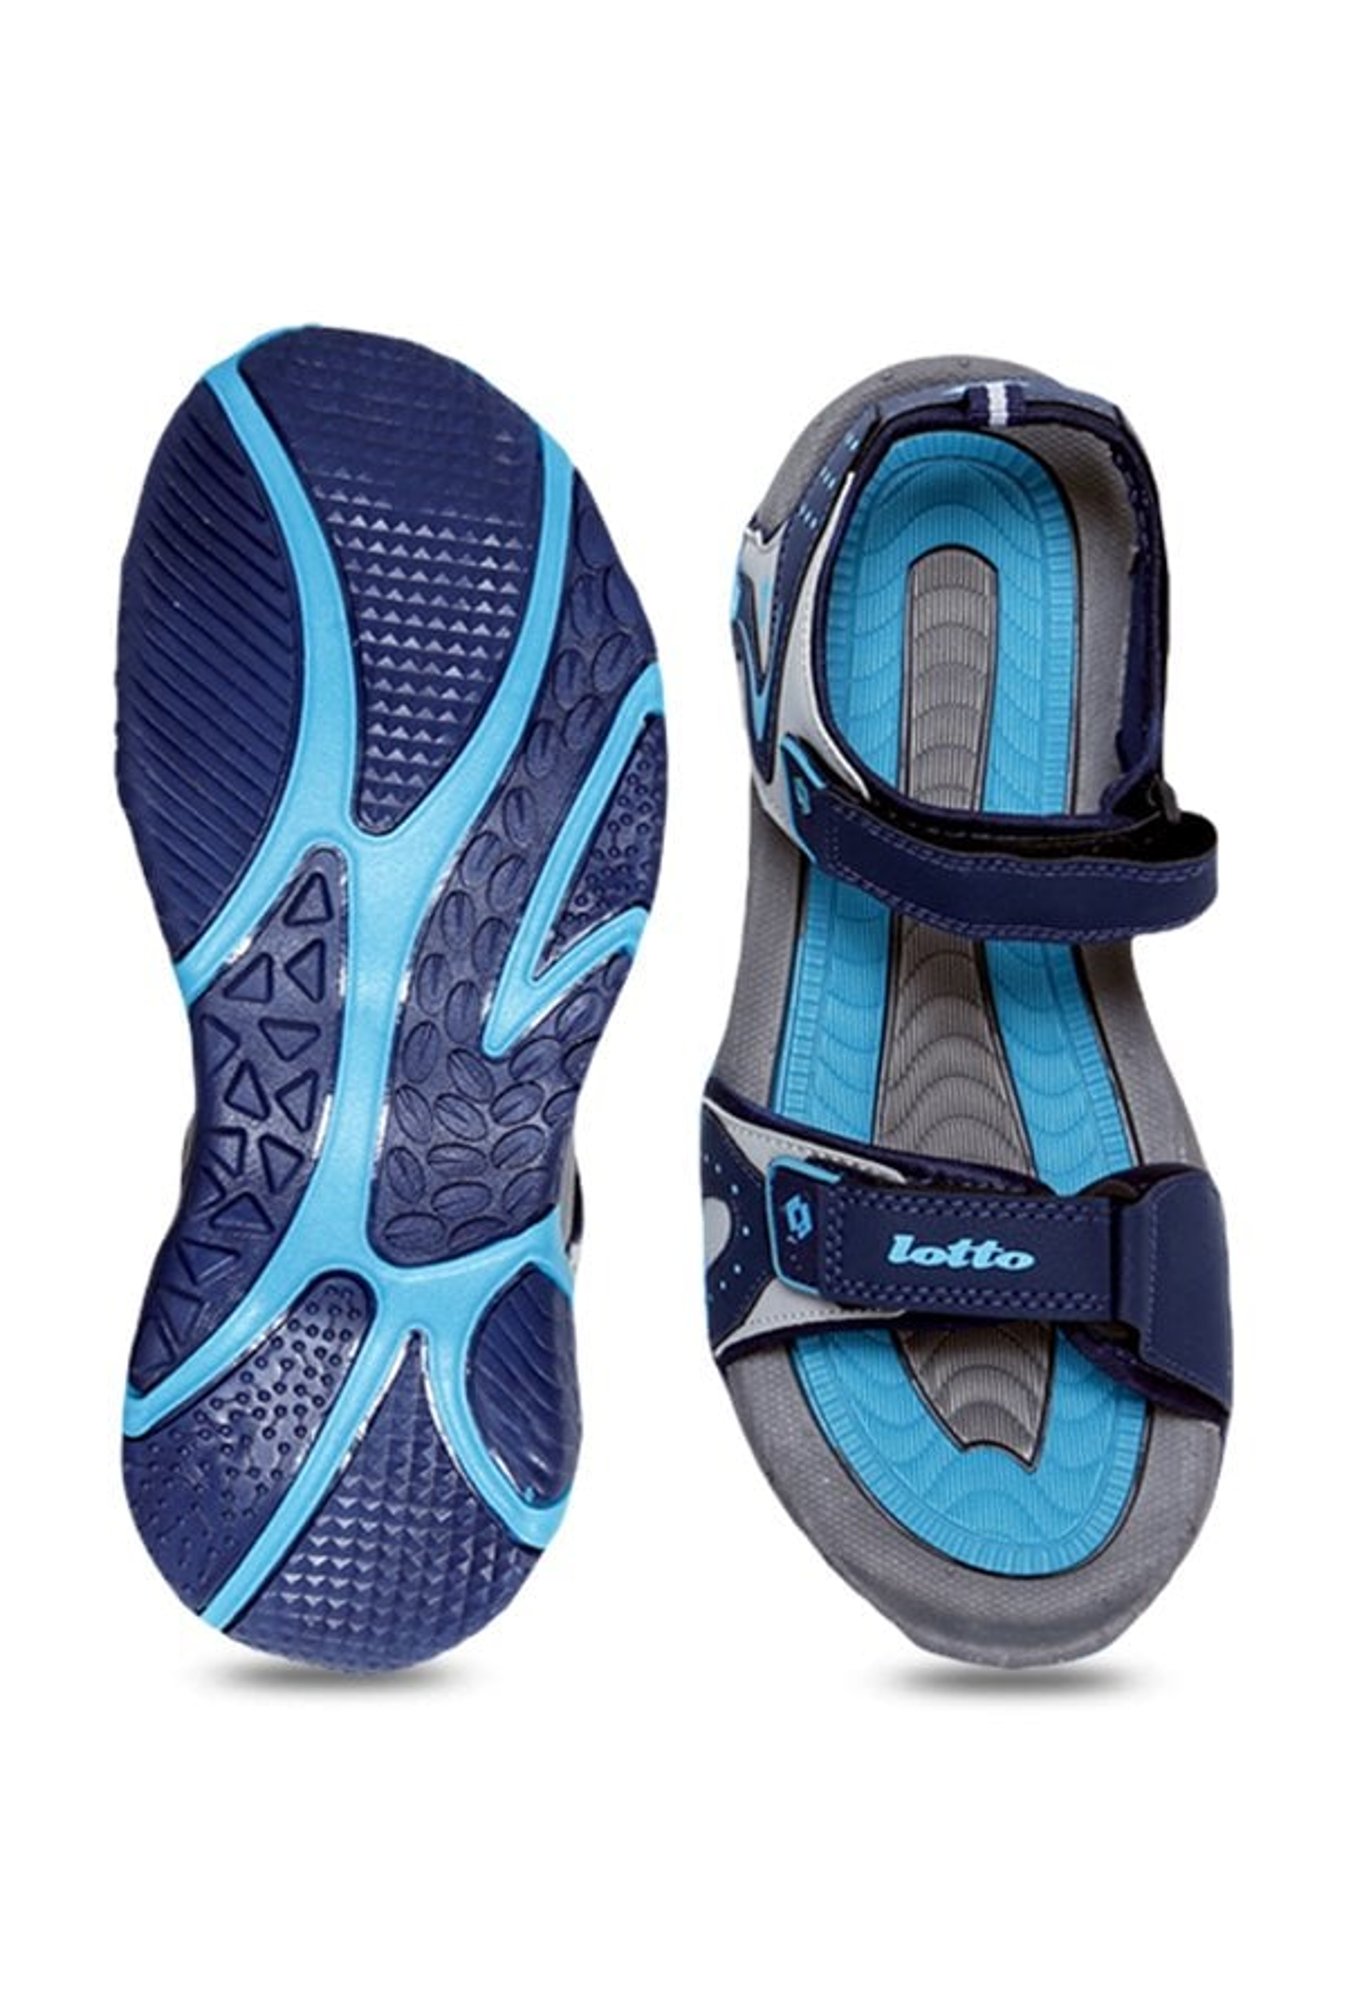 LOTTO Men Navy Sports Sandals - Price History